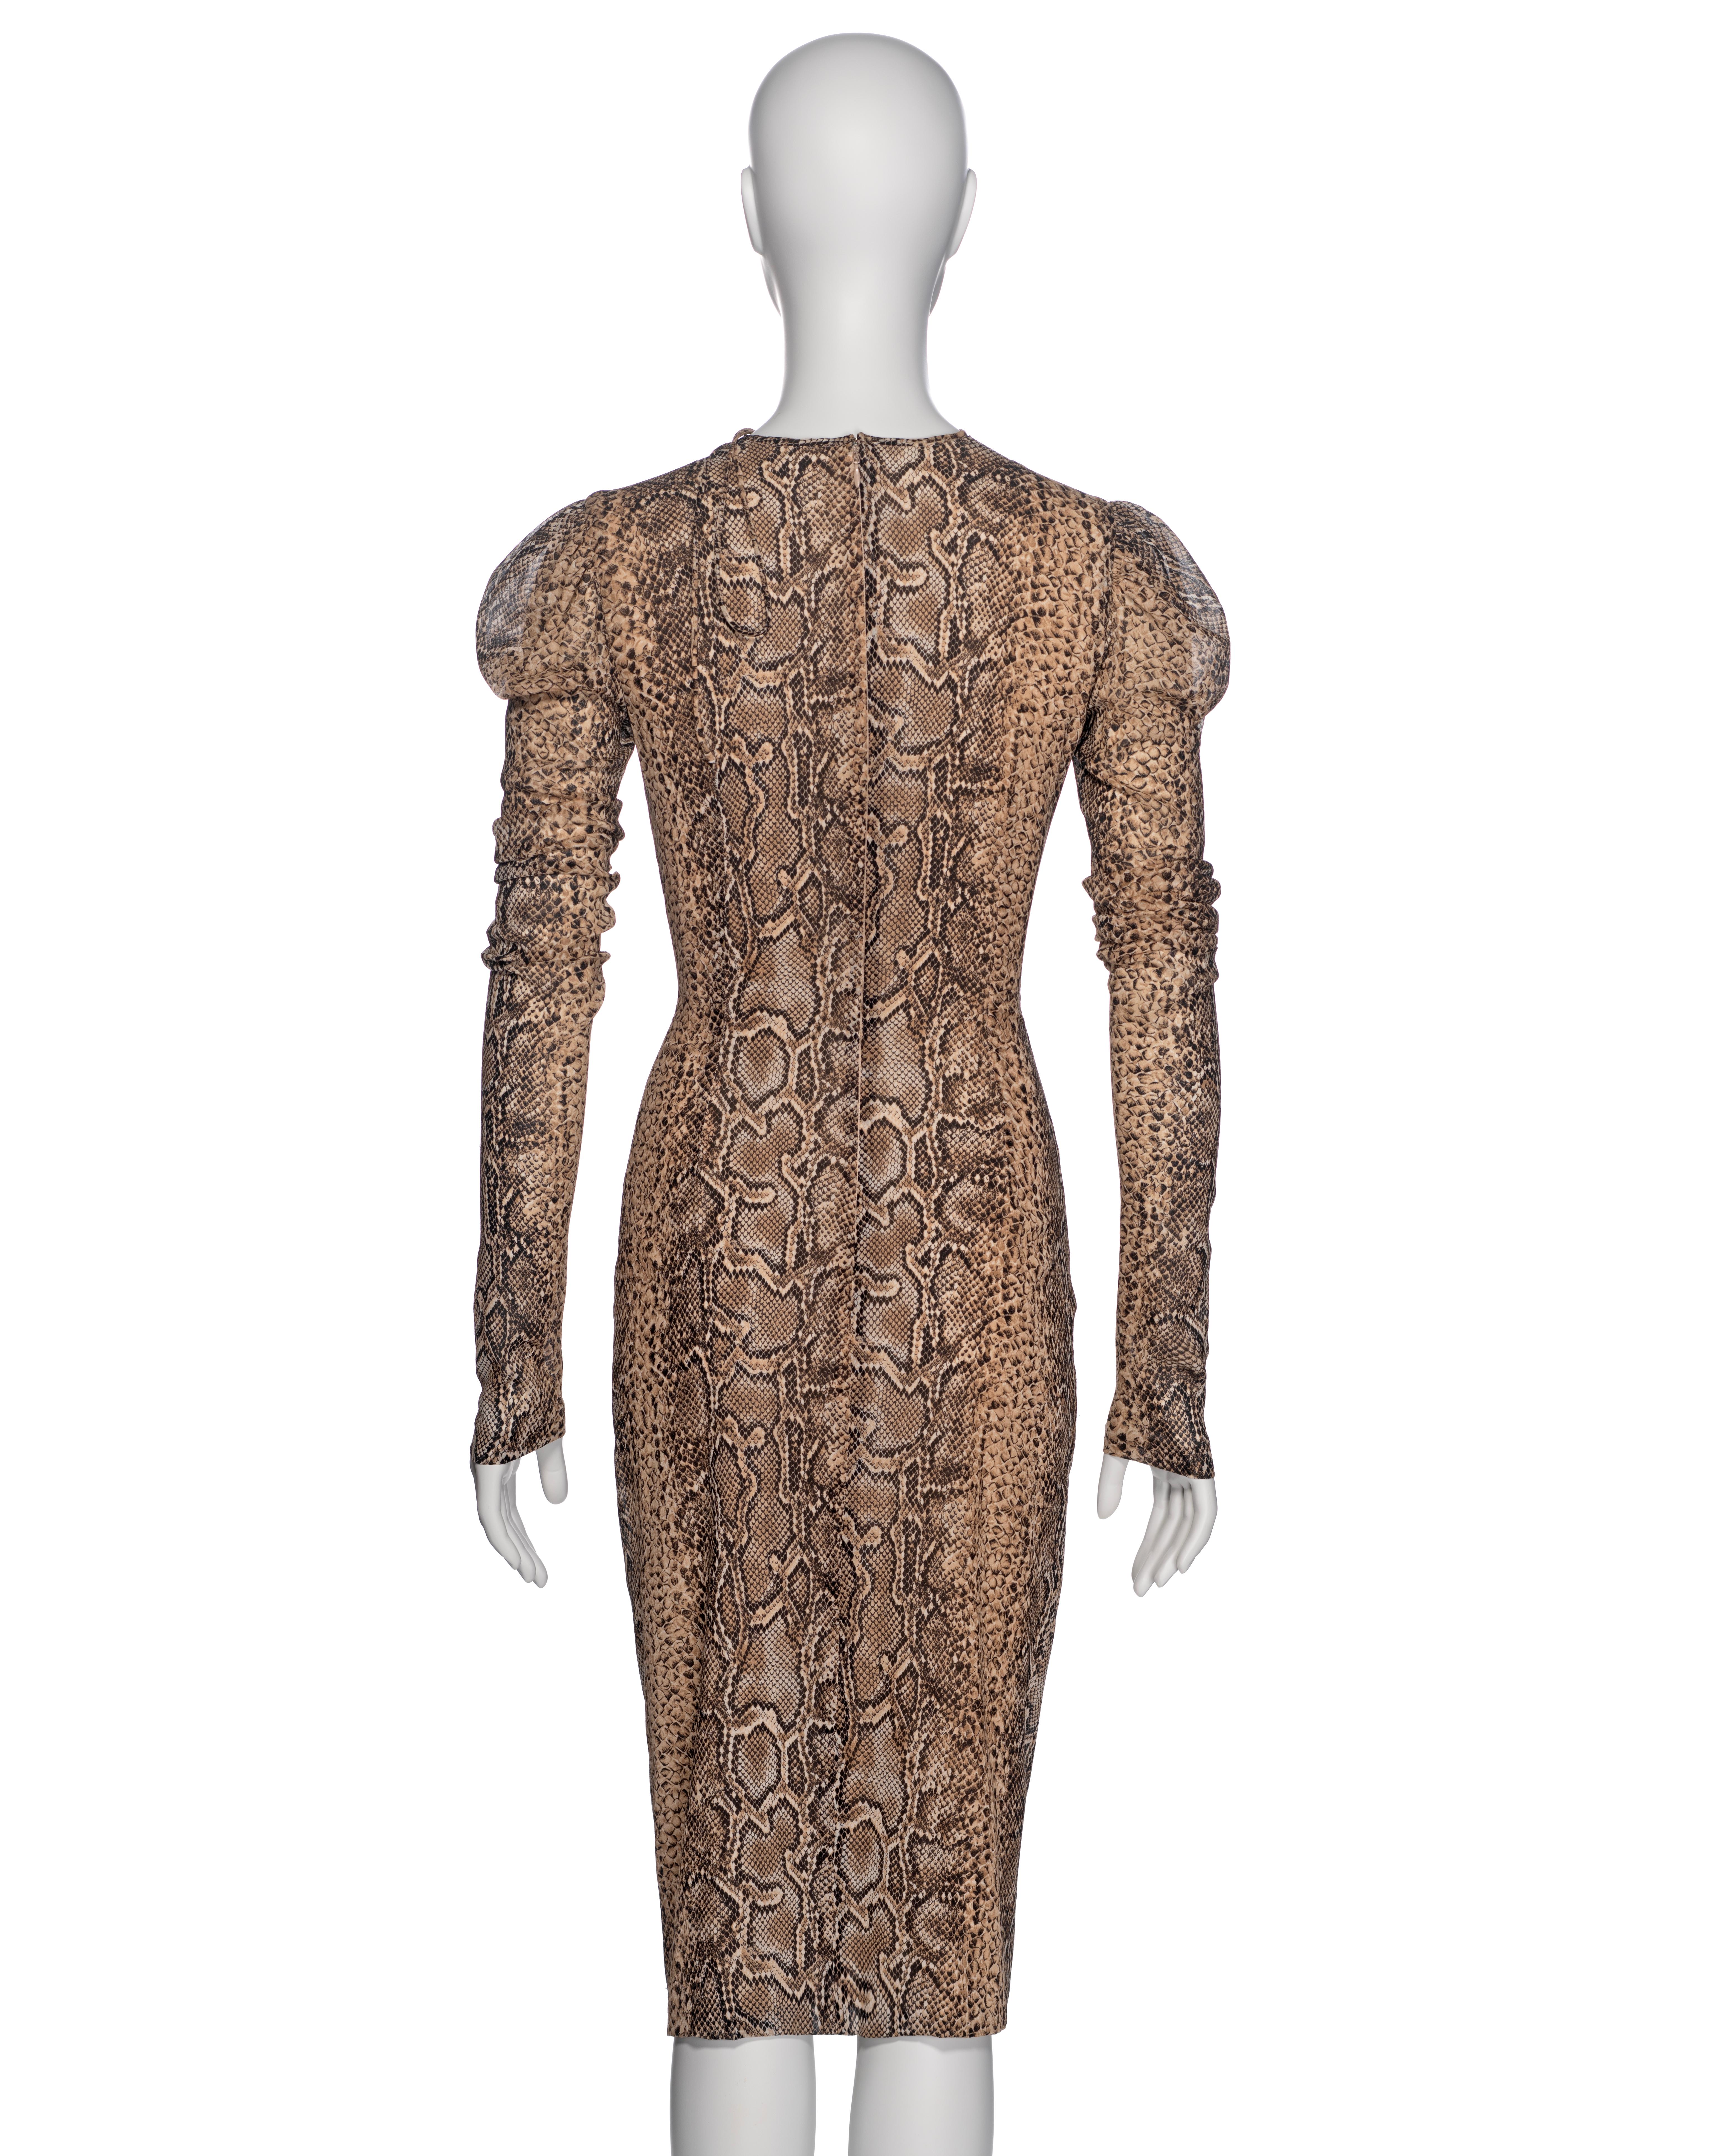 Dolce & Gabbana Snakeskin Print Low Plunge Dress with Crystal Heart, SS 2005 For Sale 5